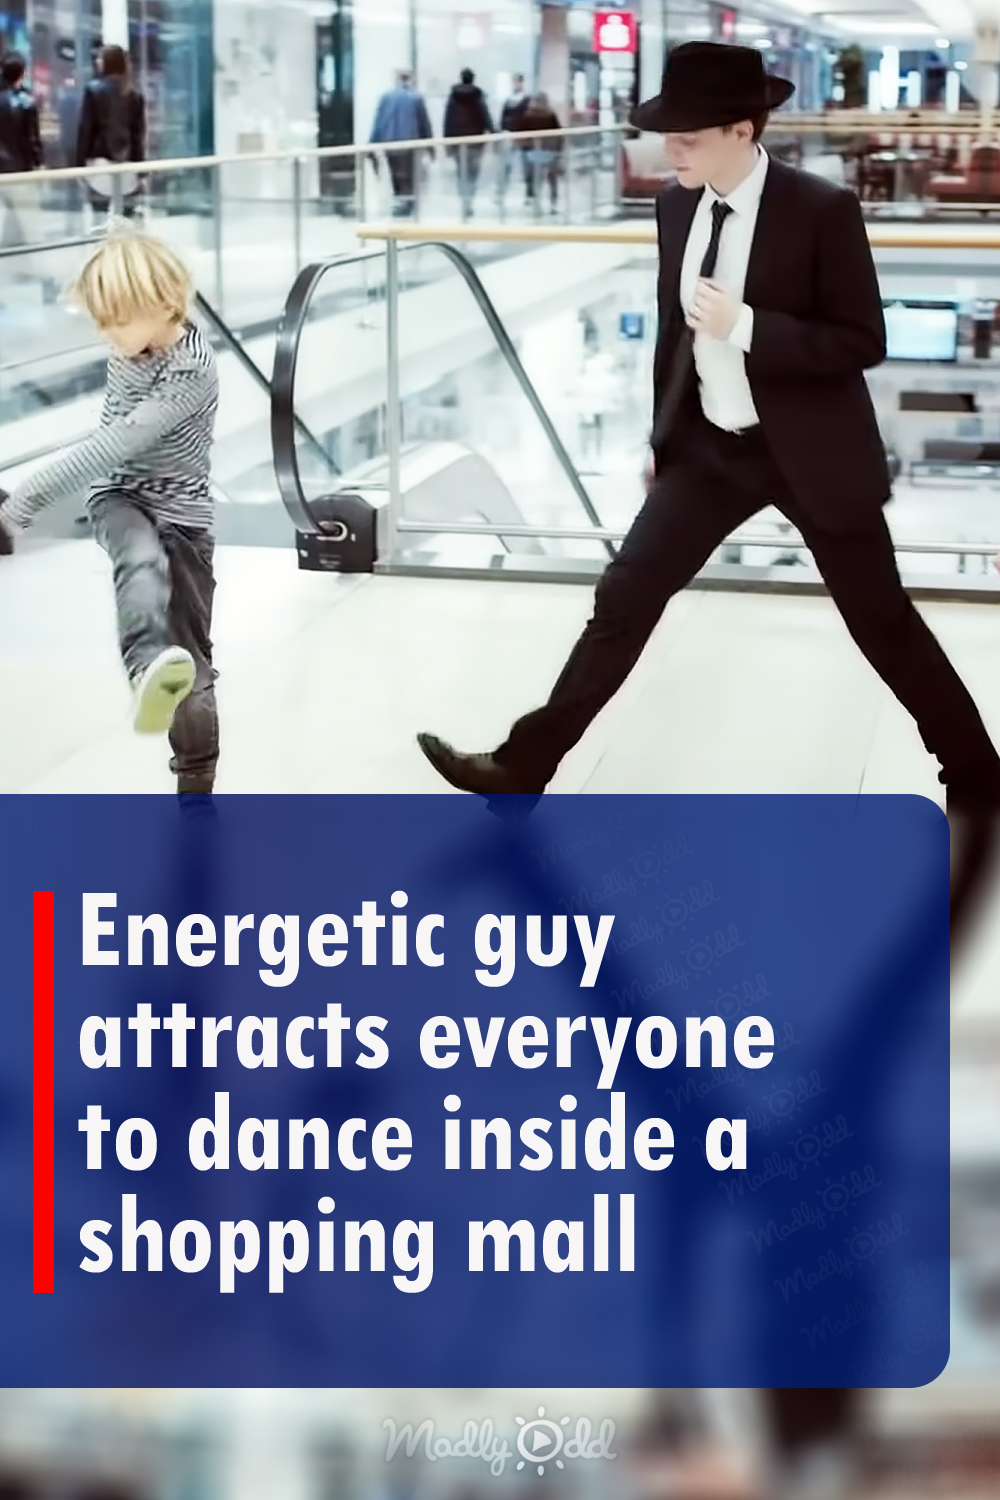 Energetic guy attracts everyone to dance inside a shopping mall